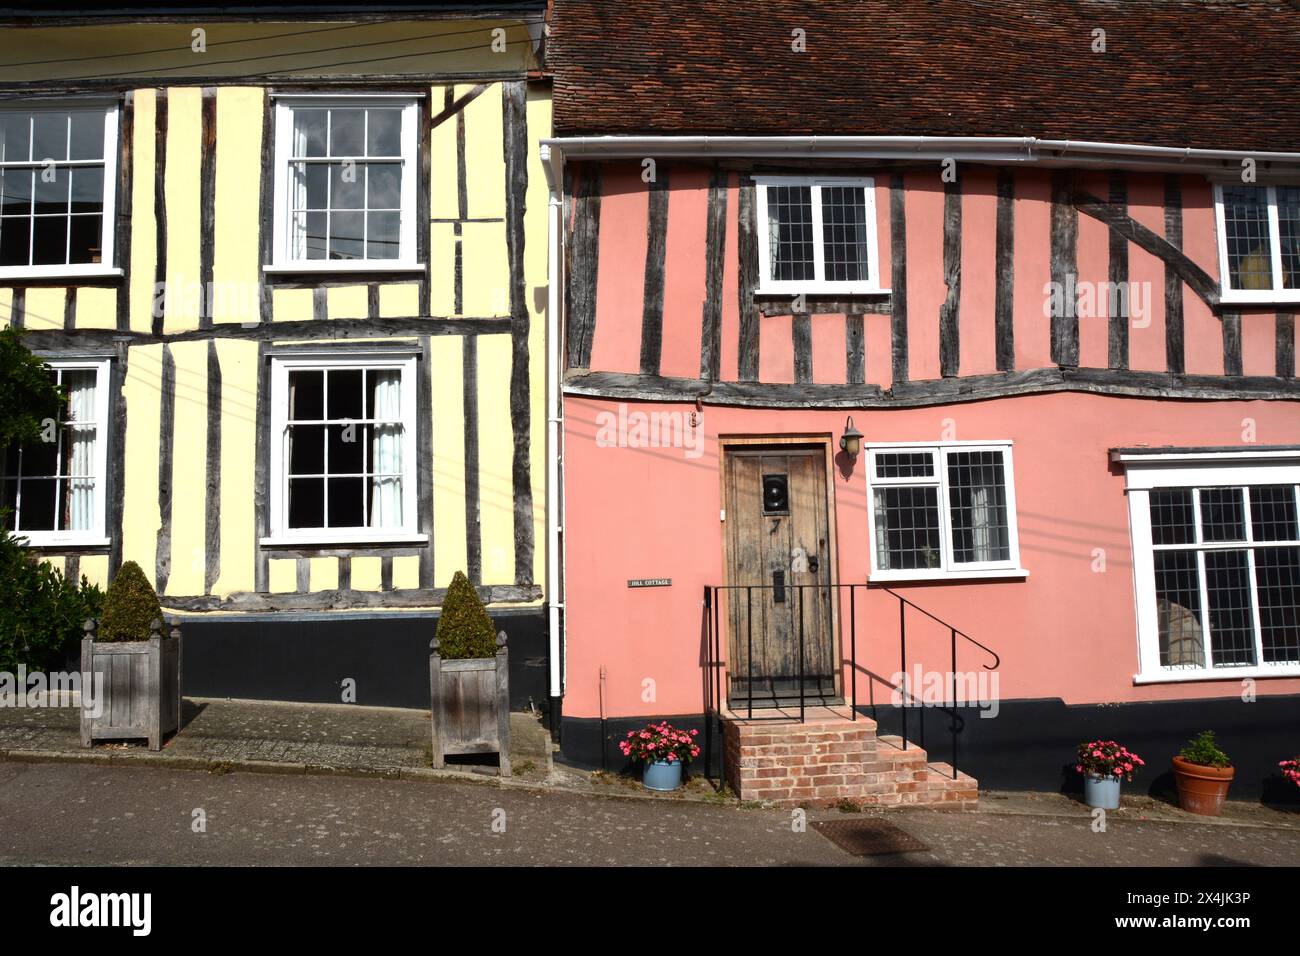 Old medieval half-timbered 'crooked houses' in the village of Lavenham in Suffolk county, England, United Kingdom. Stock Photo